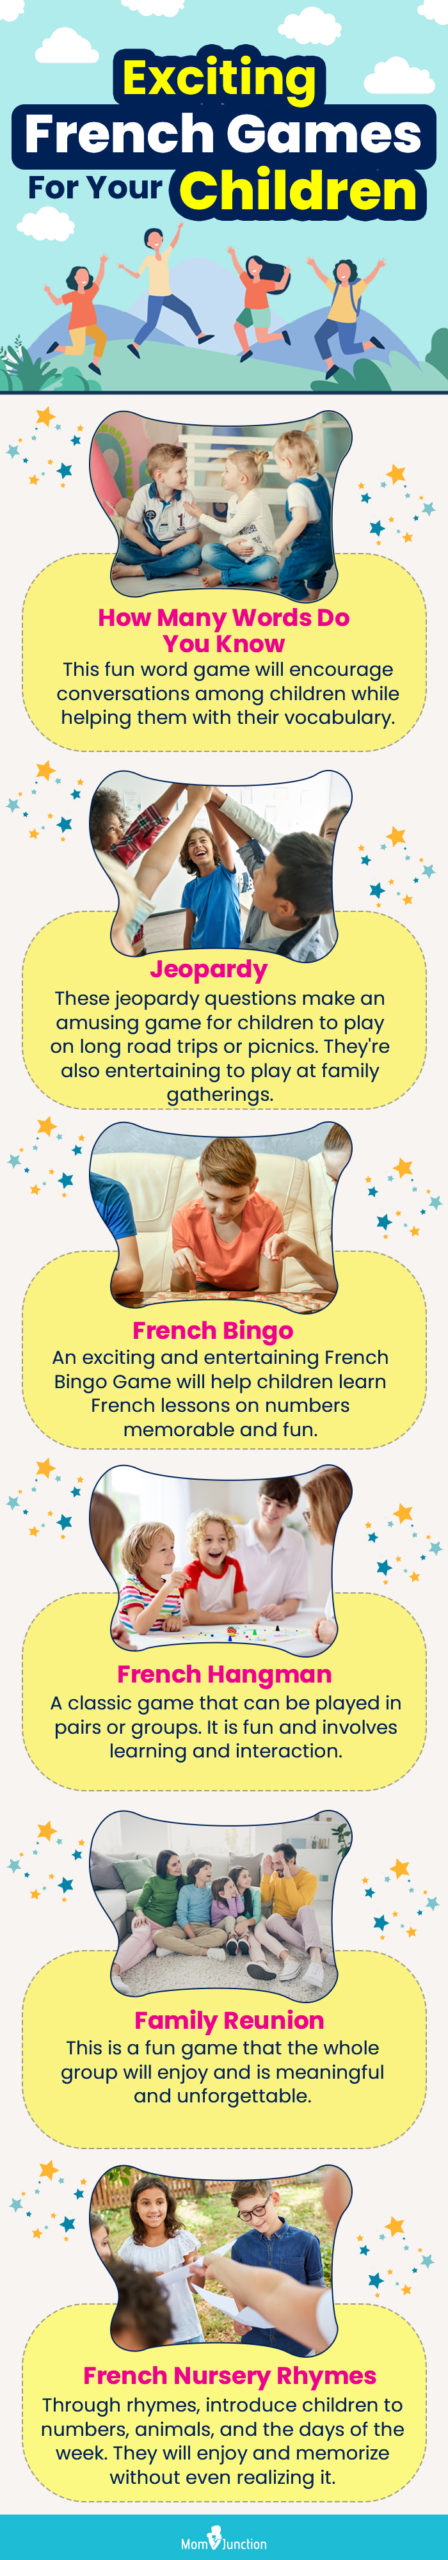 exciting french games for your children (infographic)